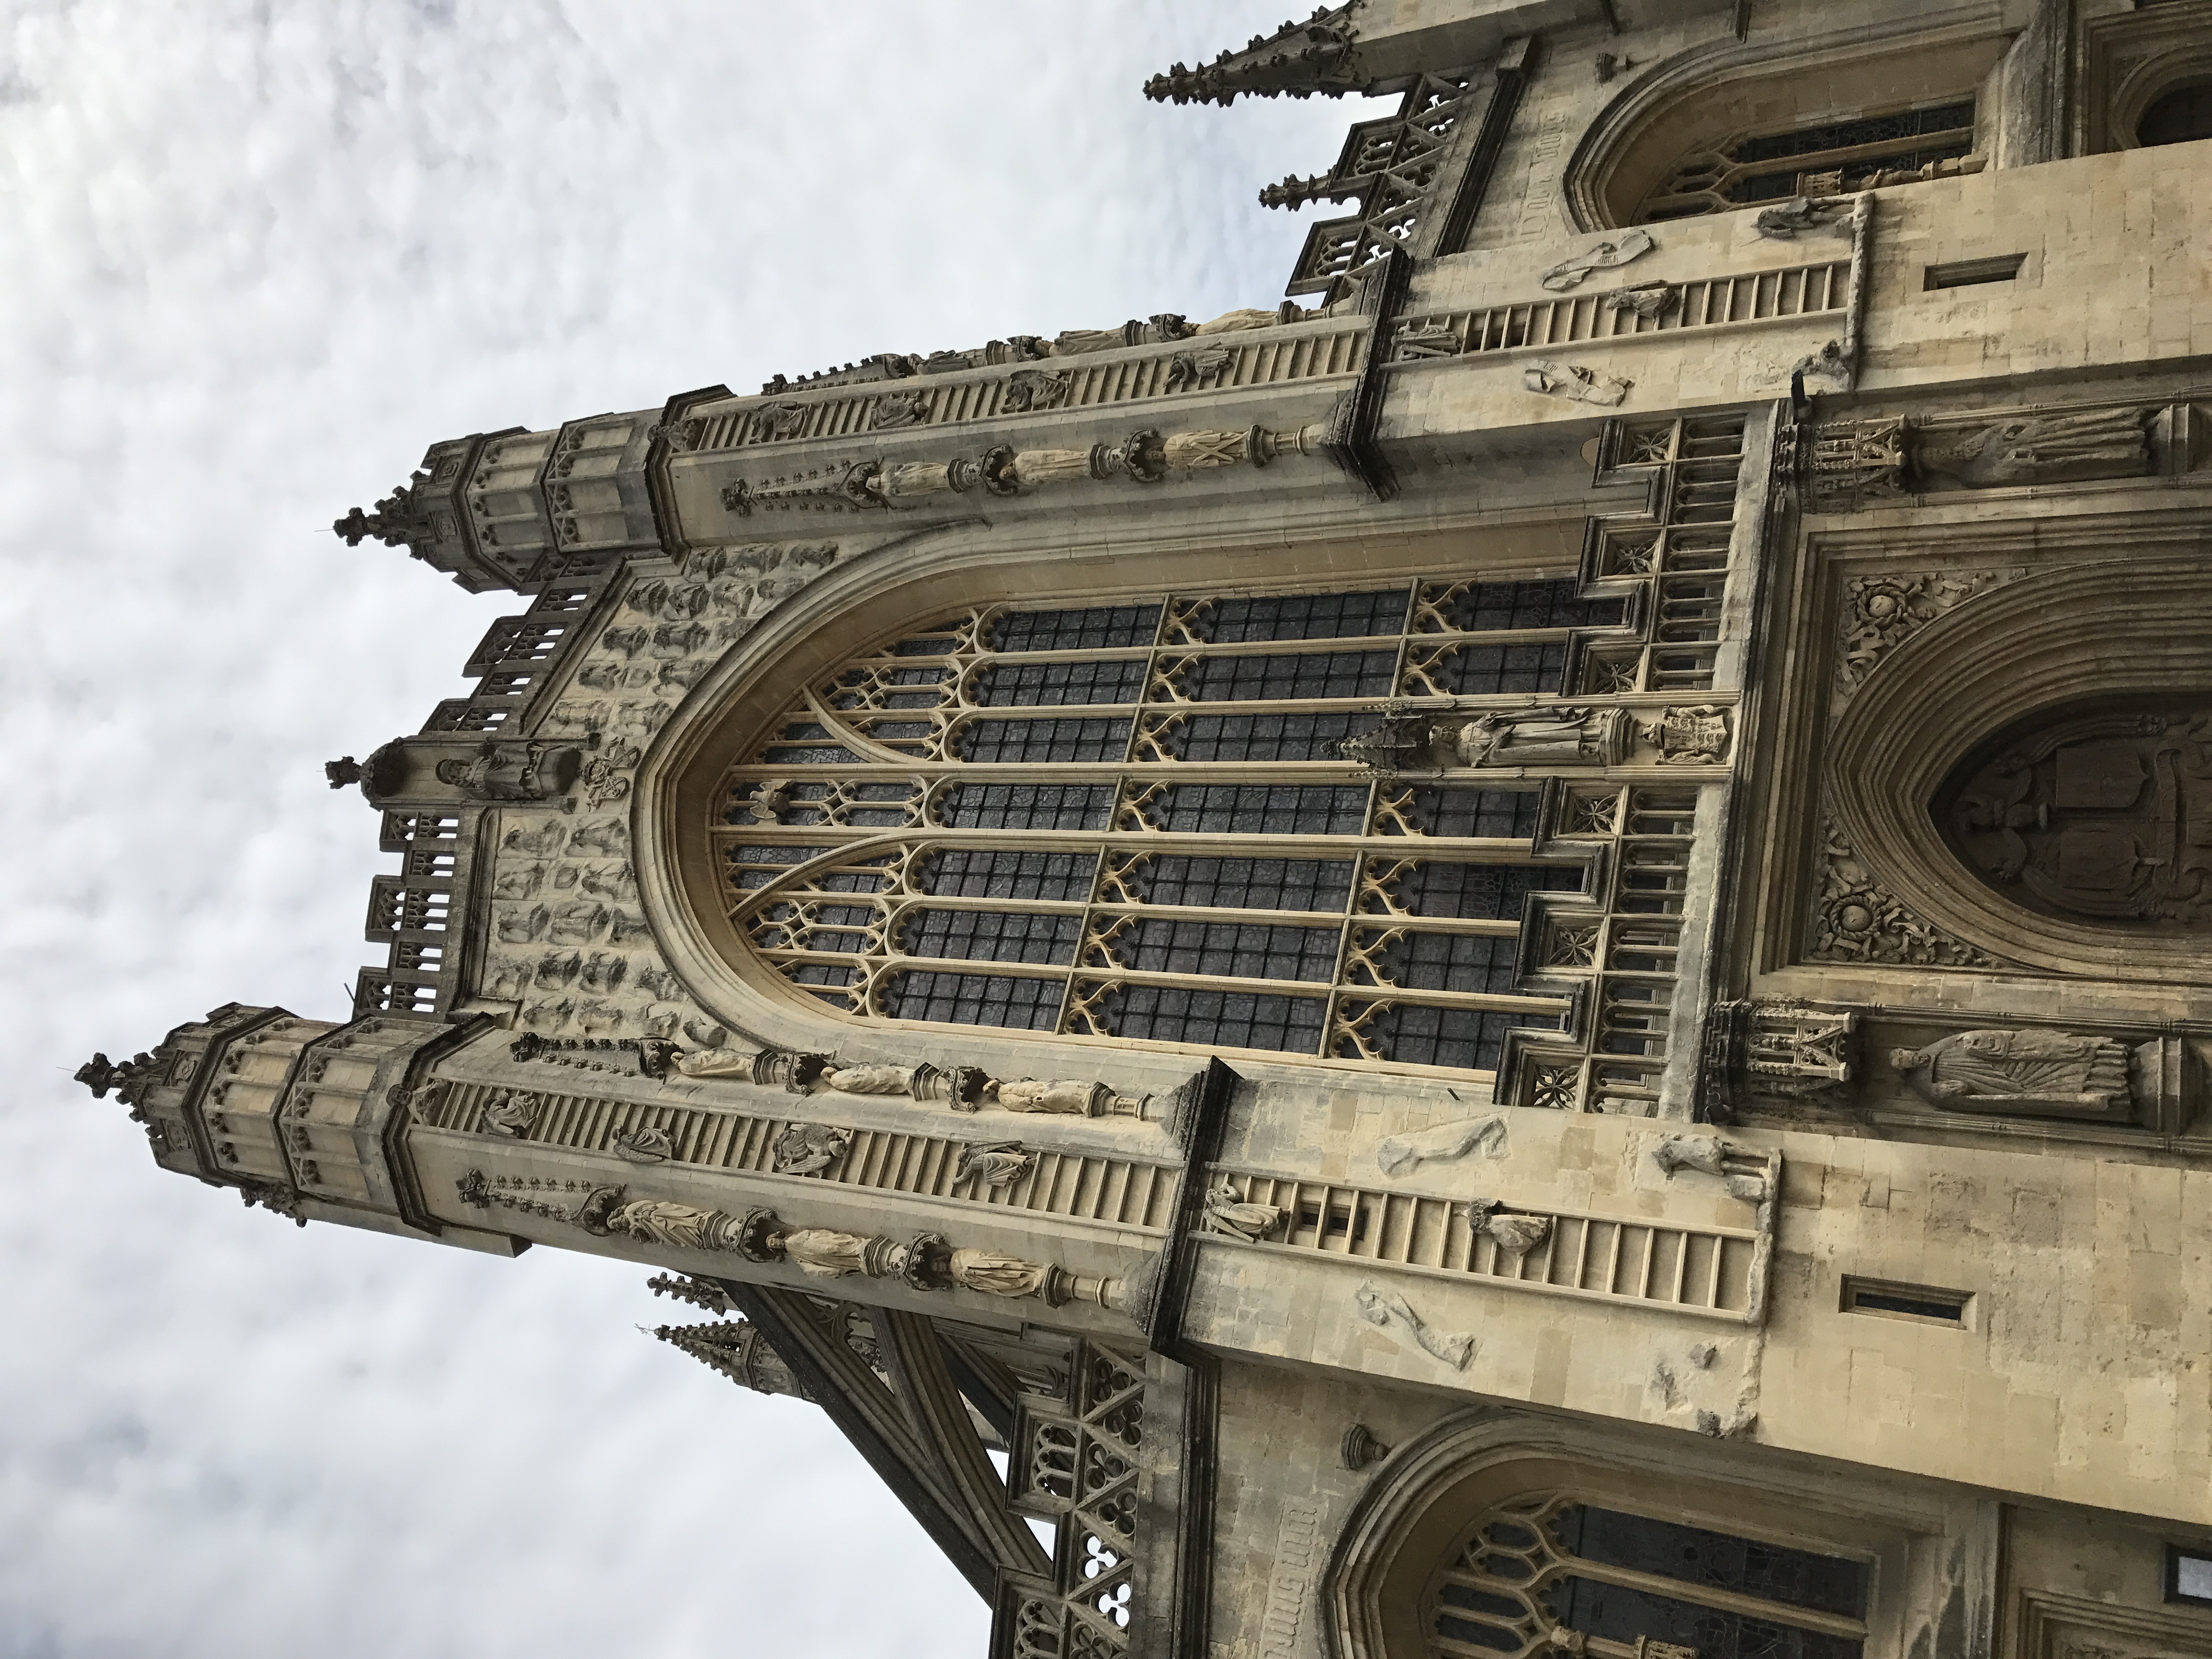 The glorious West front of Bath Abbey, according to Bishop Oliver King's vision